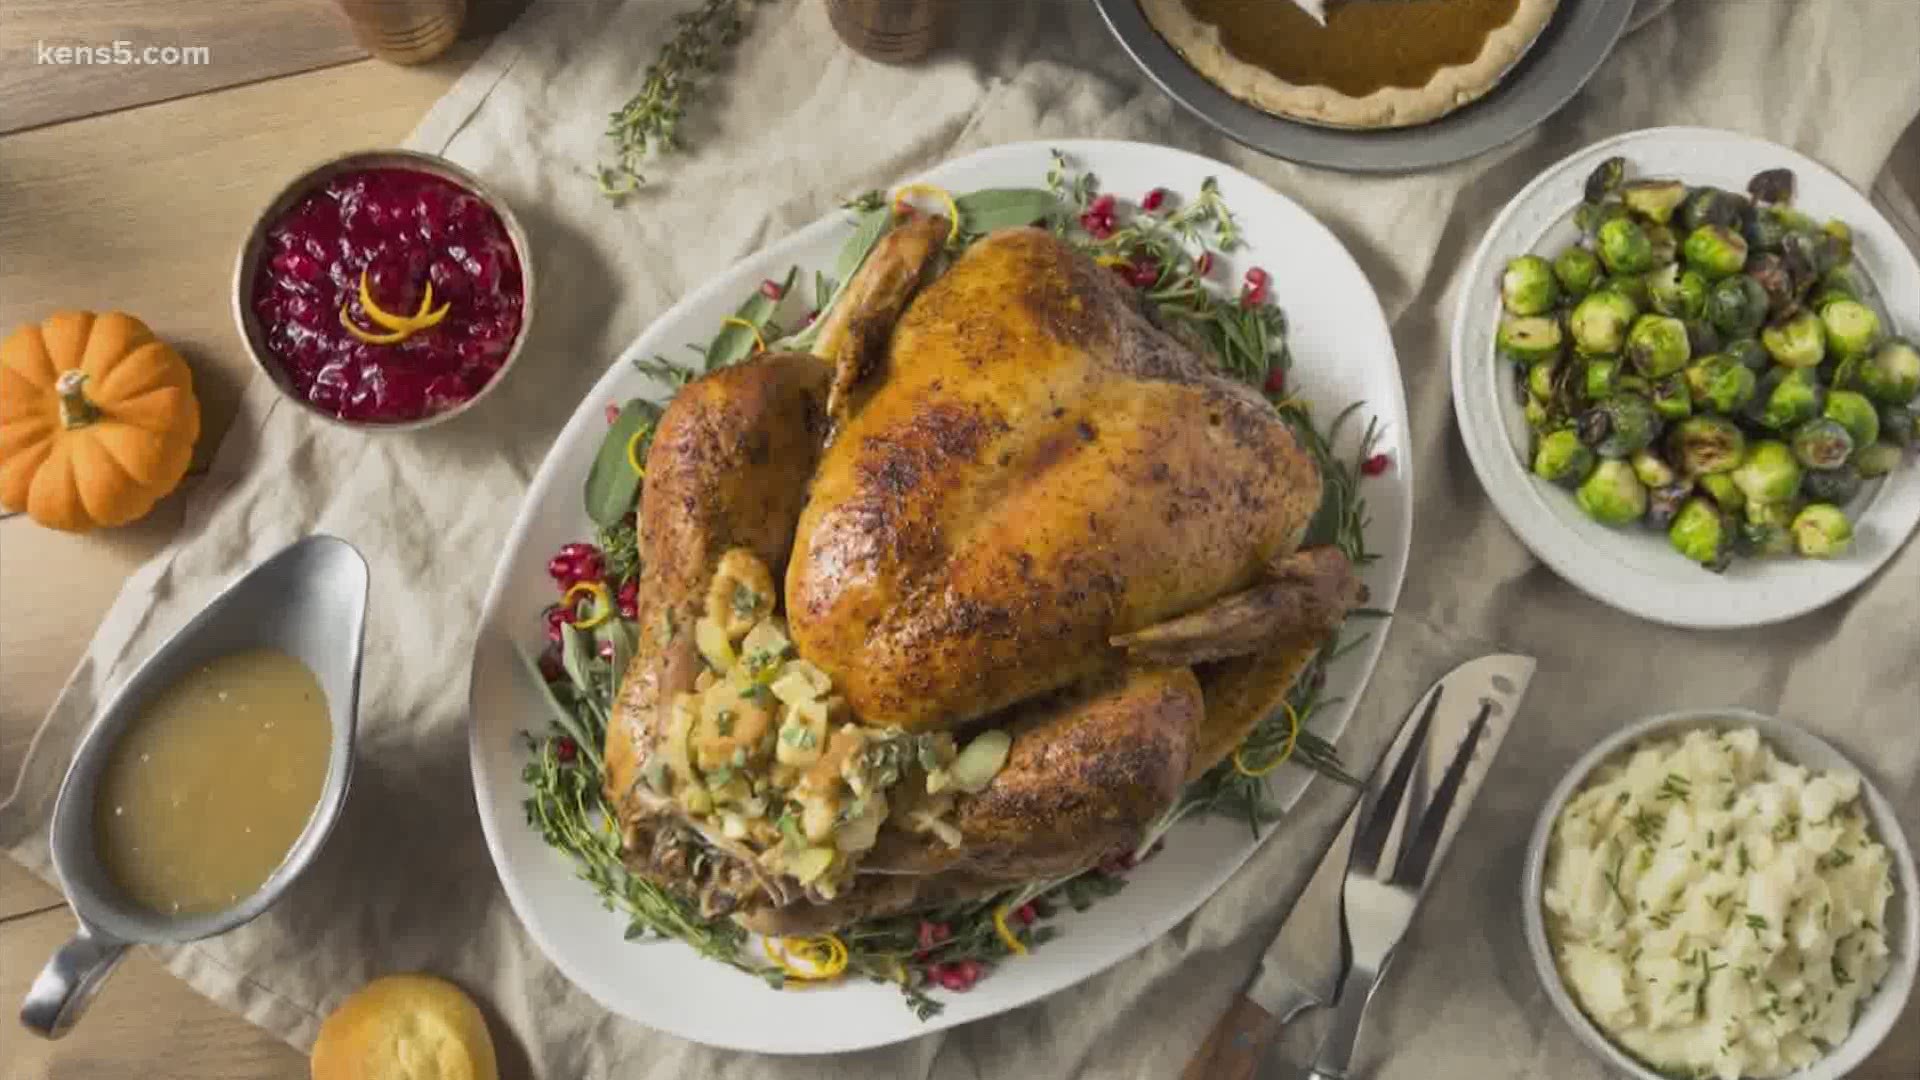 With coronavirus infections growing around the country, there are concerns that family gatherings at Thanksgiving could spread the virus further.